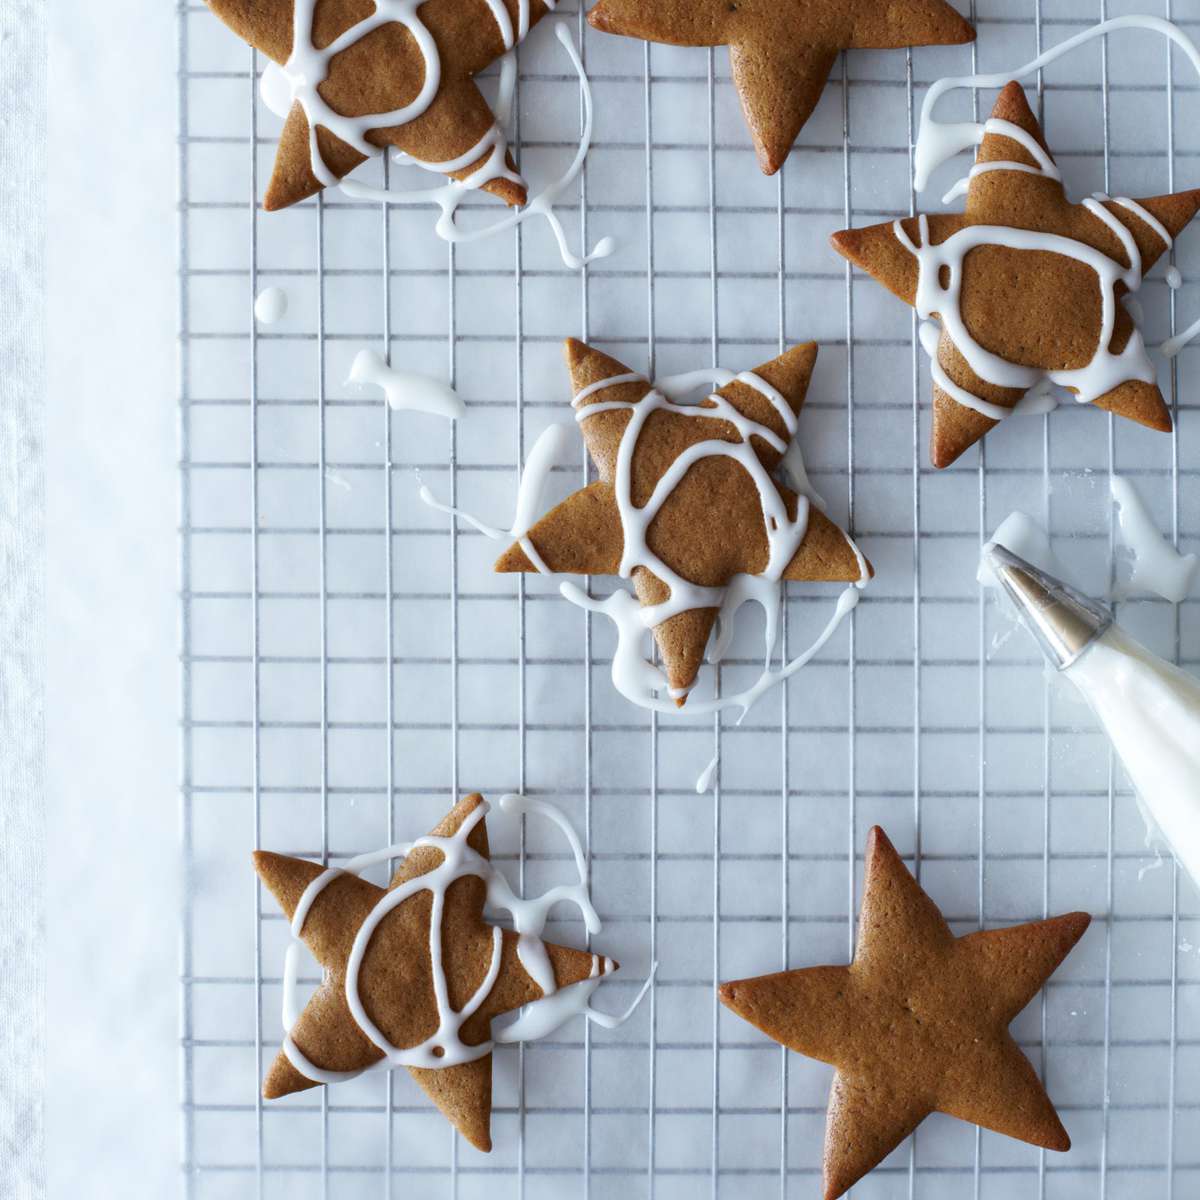 Spiced Gingerbread Cookies